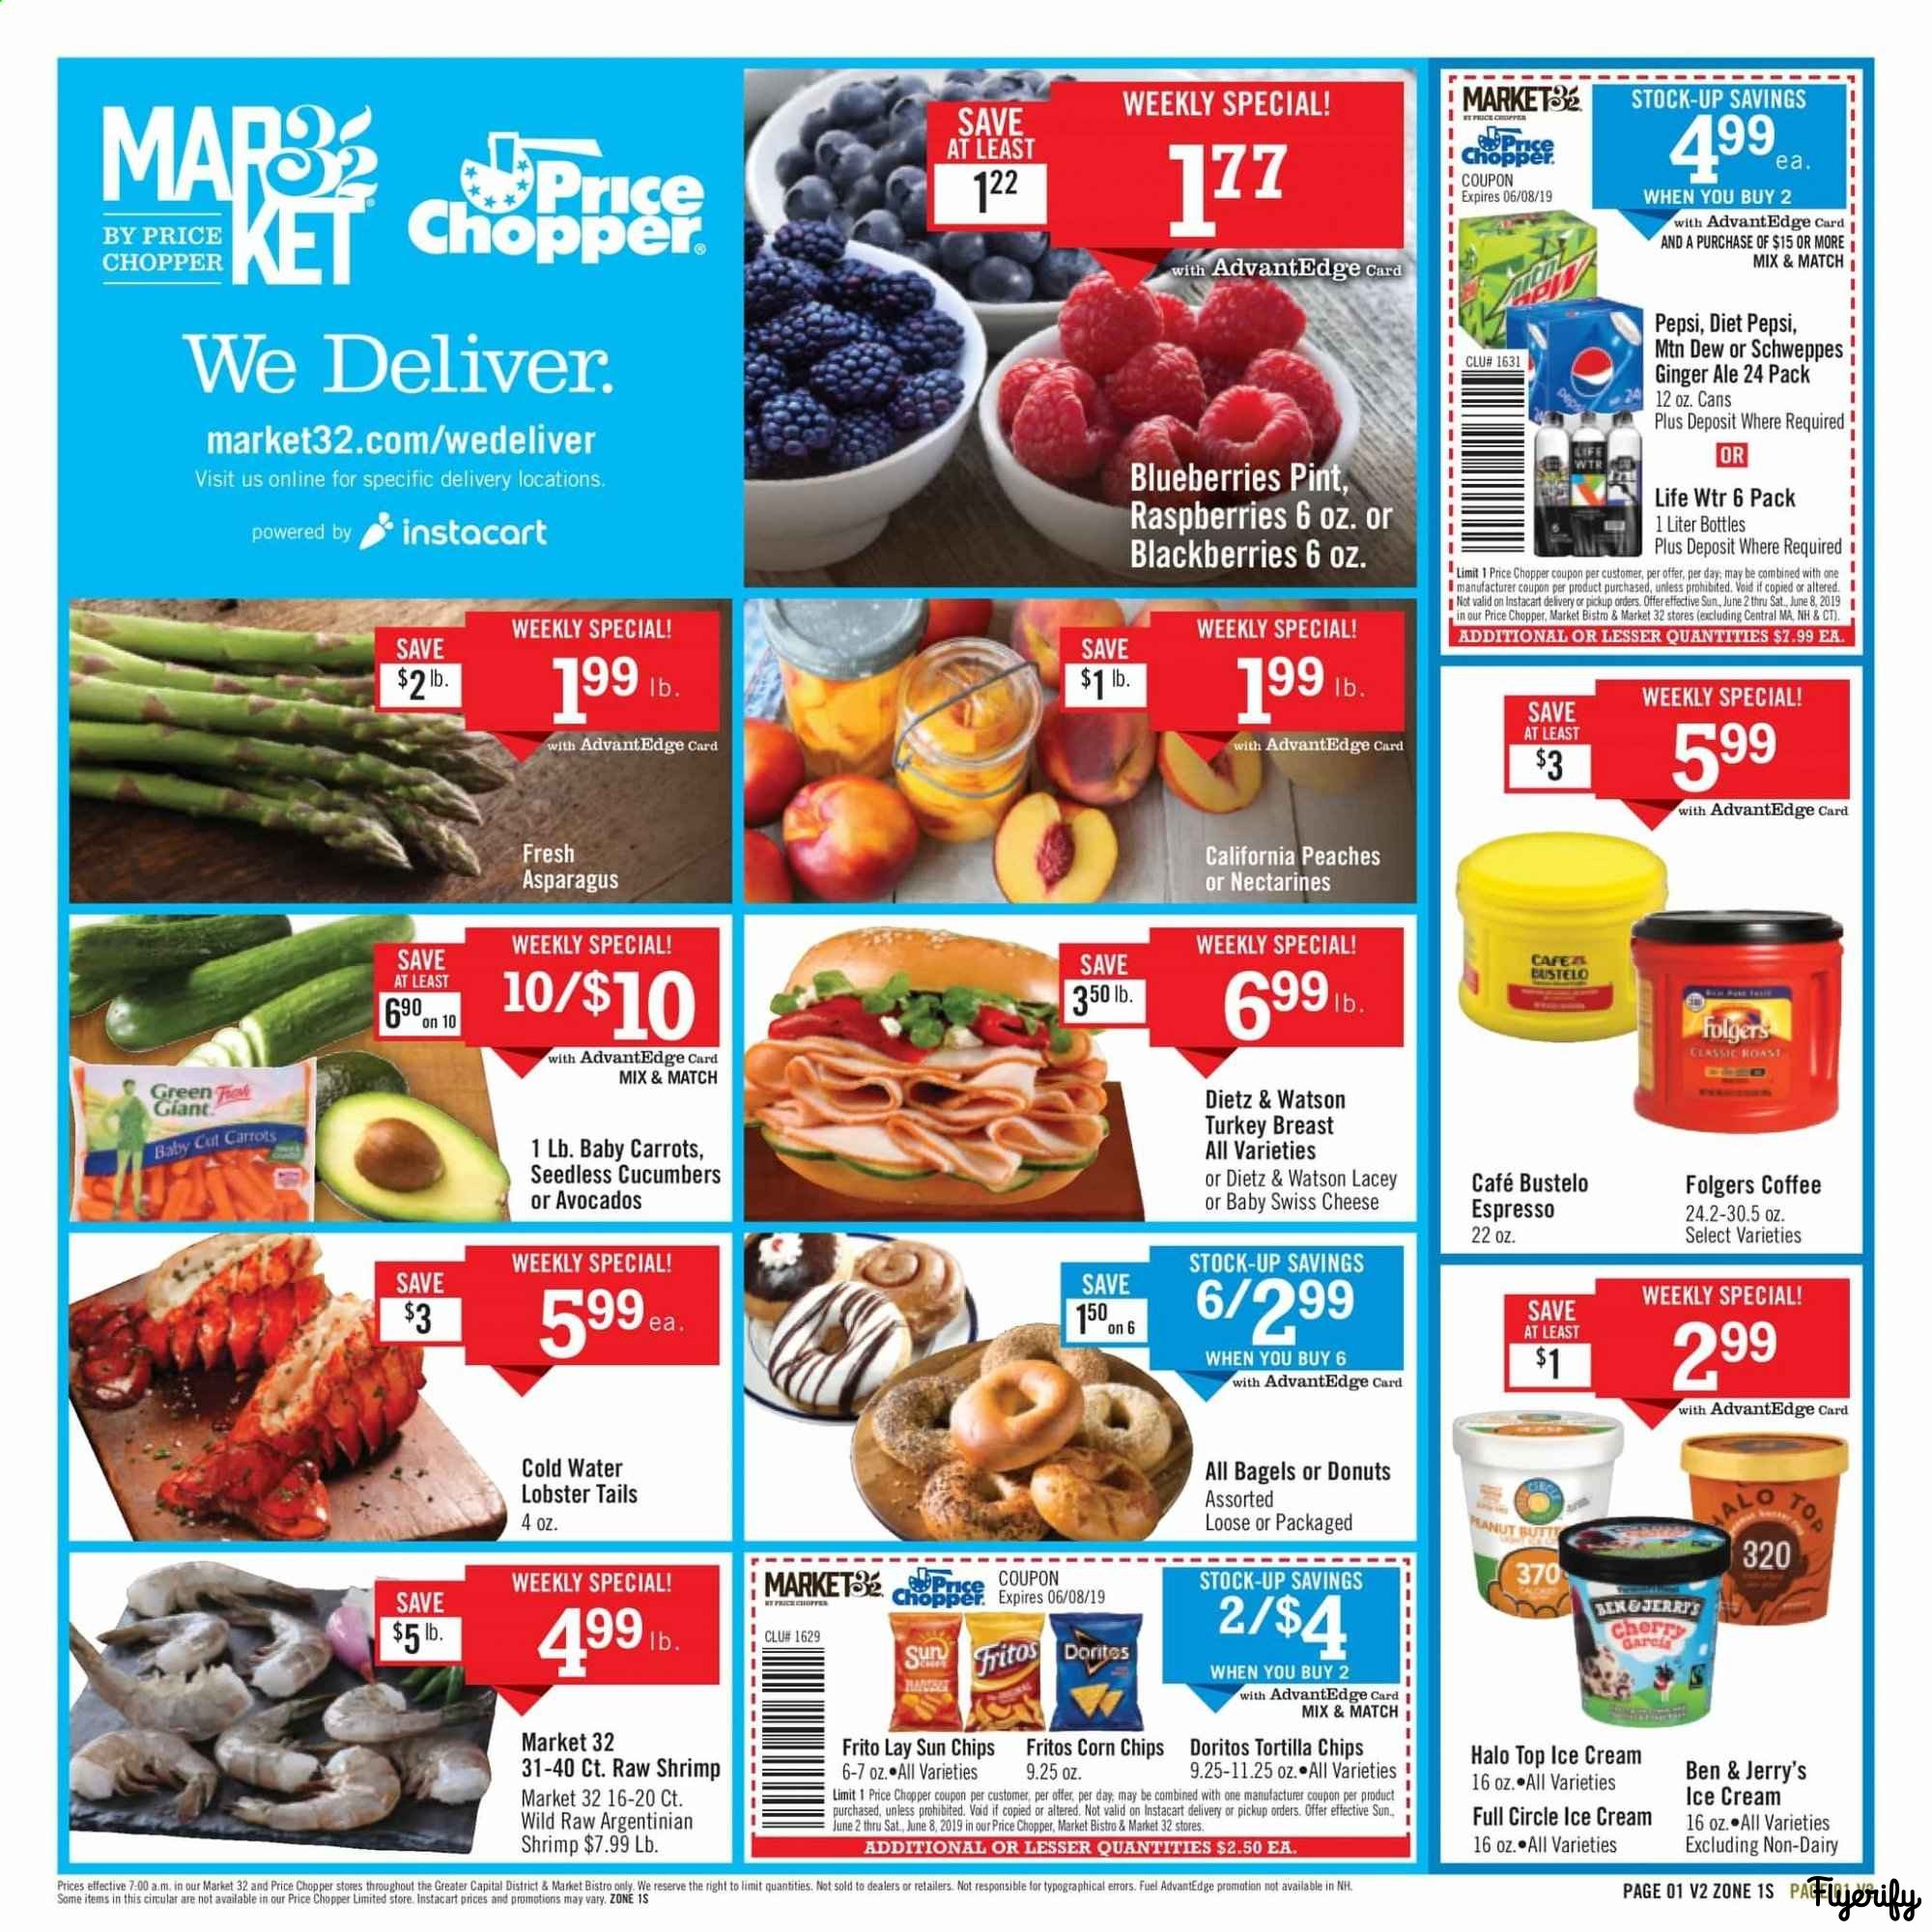 price chopper e coupons for this week